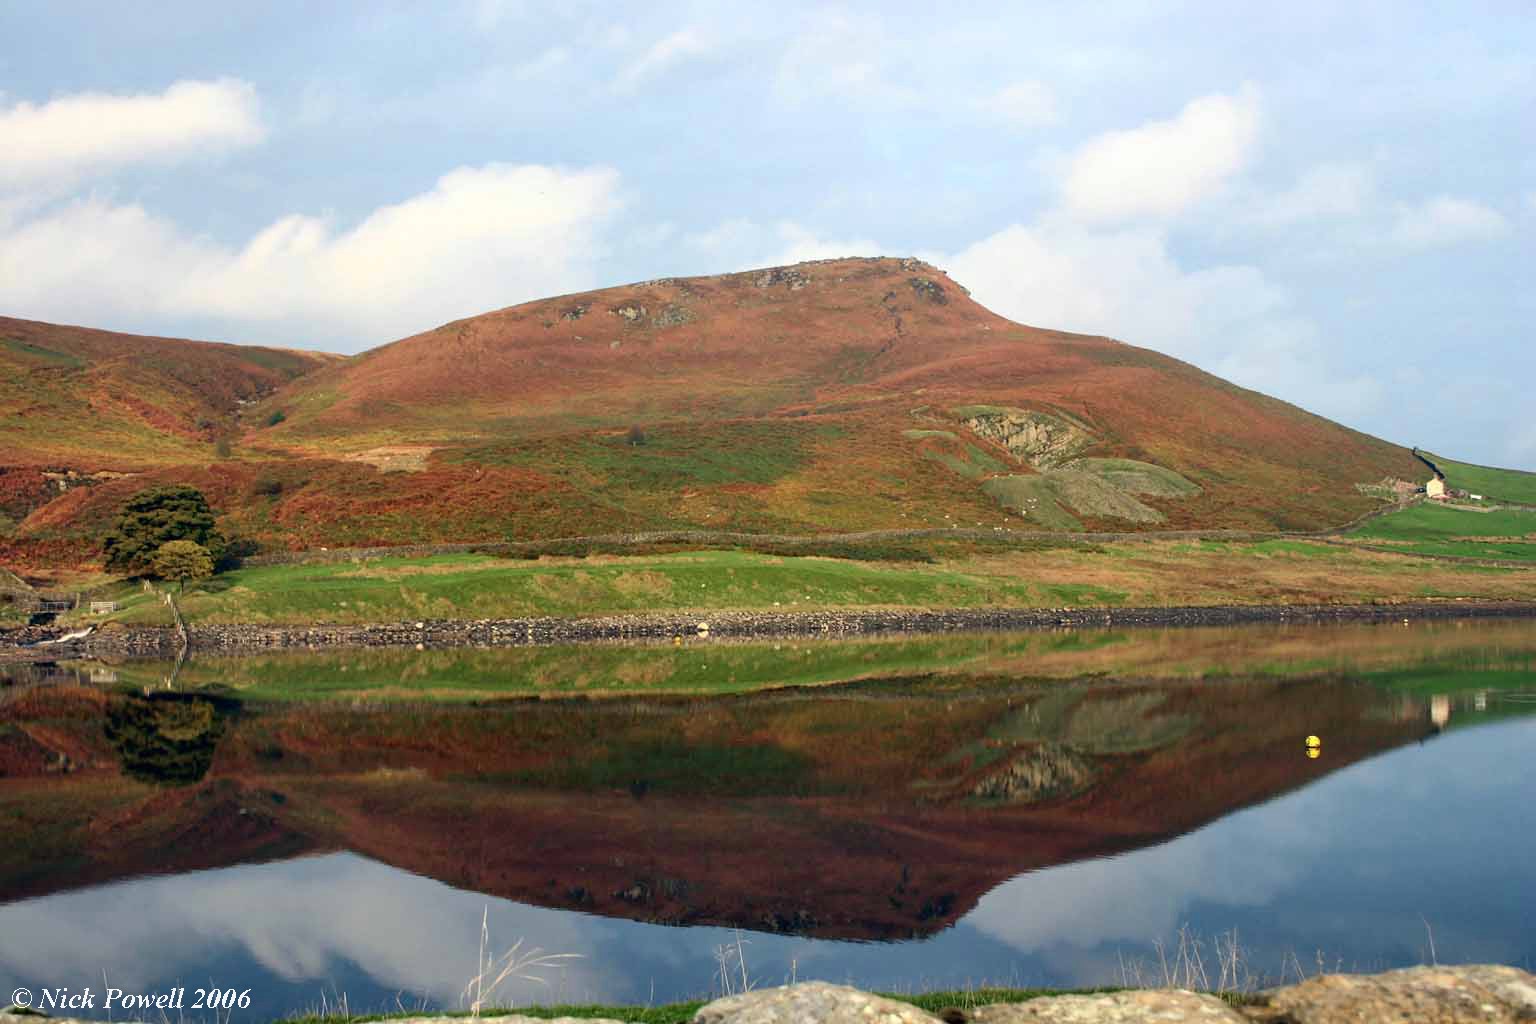 Embsay Crag North Yorkshire 2